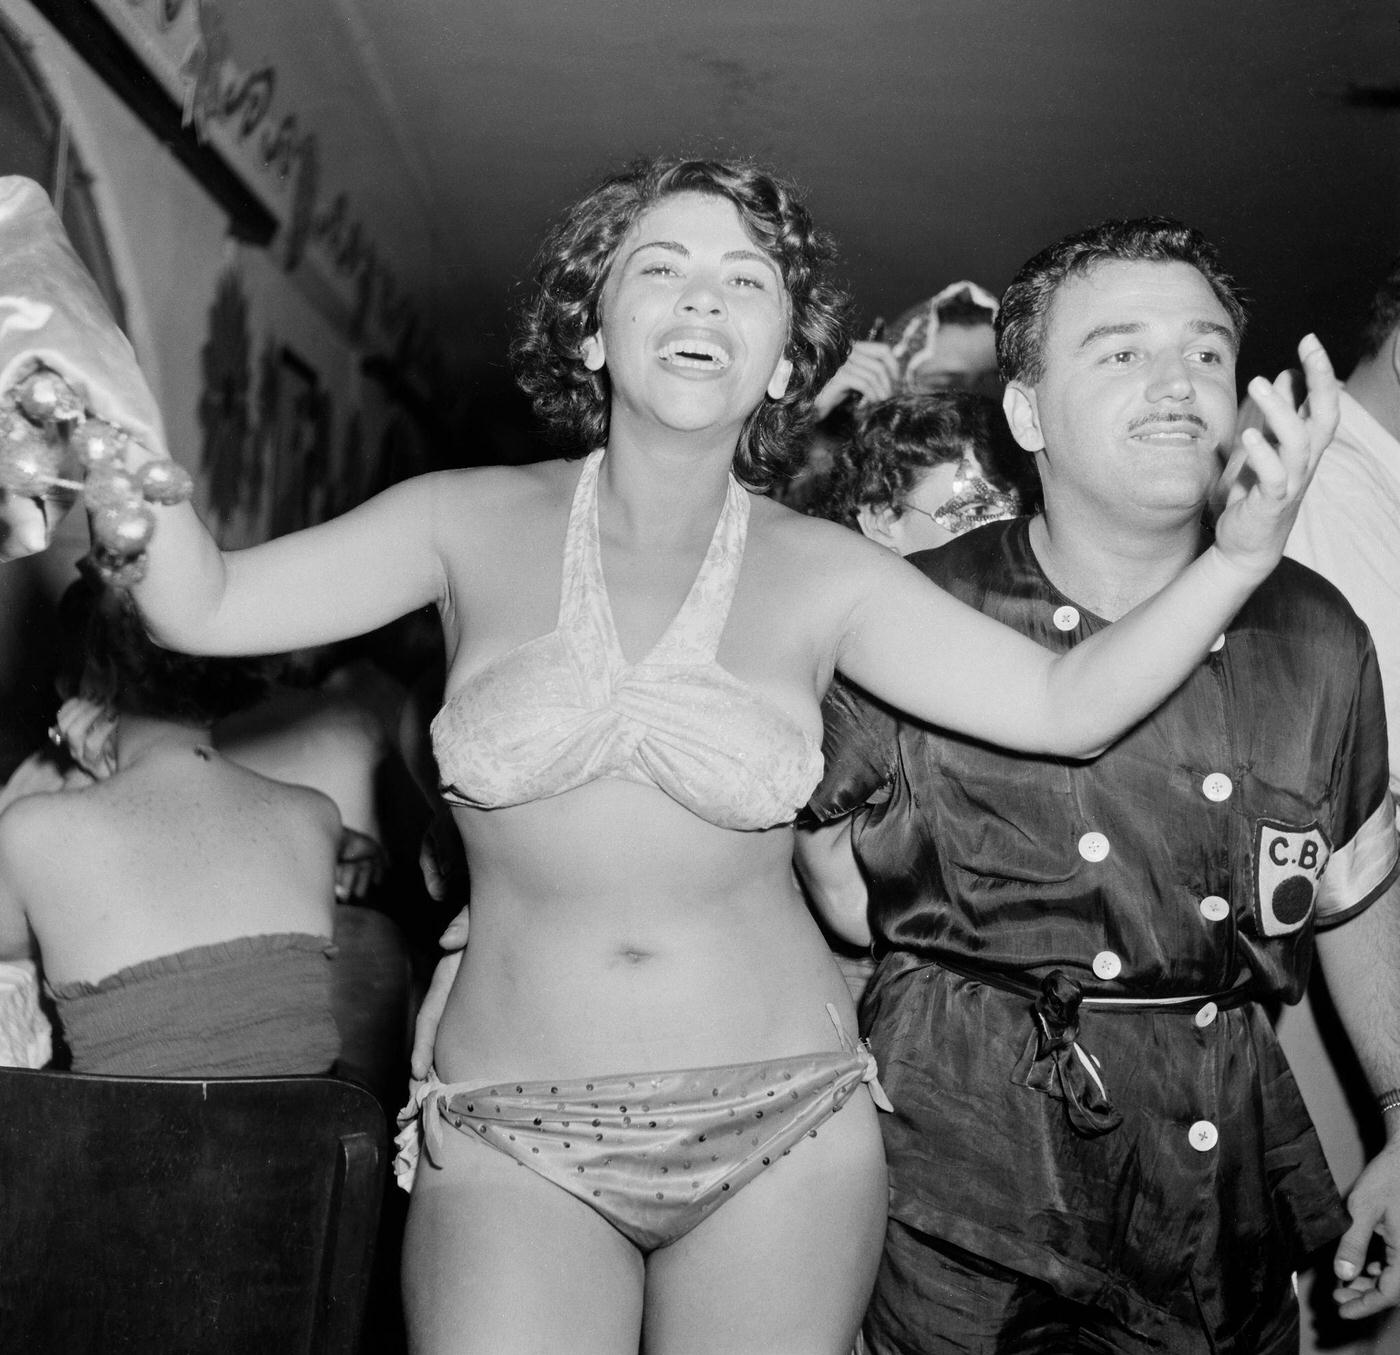 Costumed Partygoers, Carnival in Rio 1953